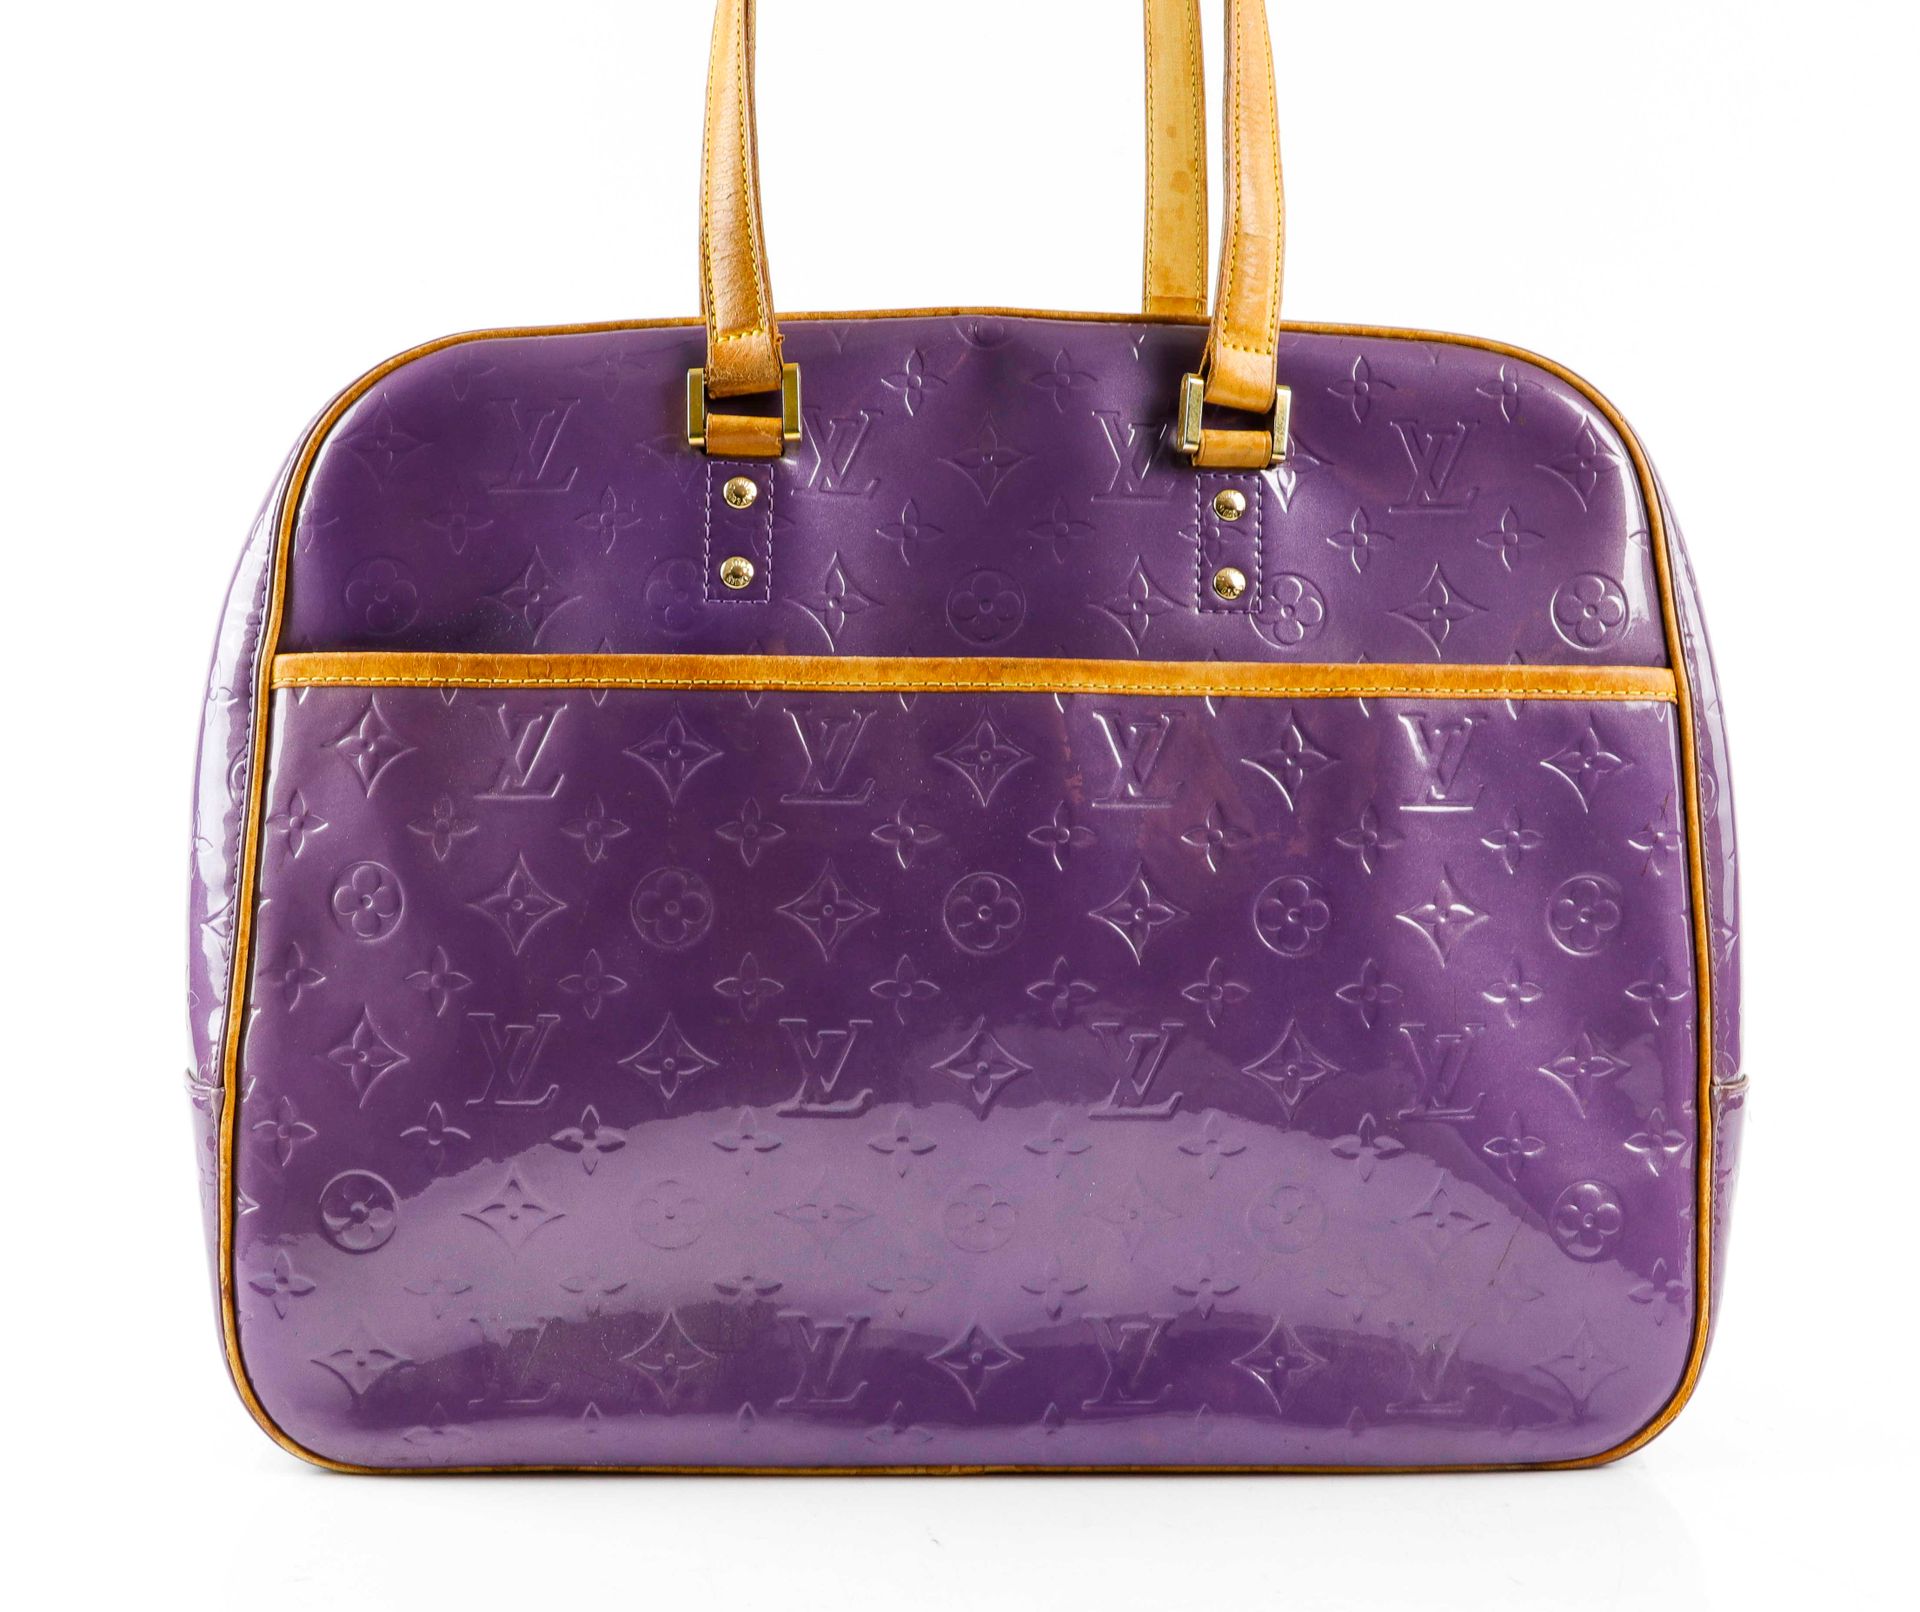 Null Louis VUITTON. Bag "Sutton" in purple patent leather. Two large handles in &hellip;